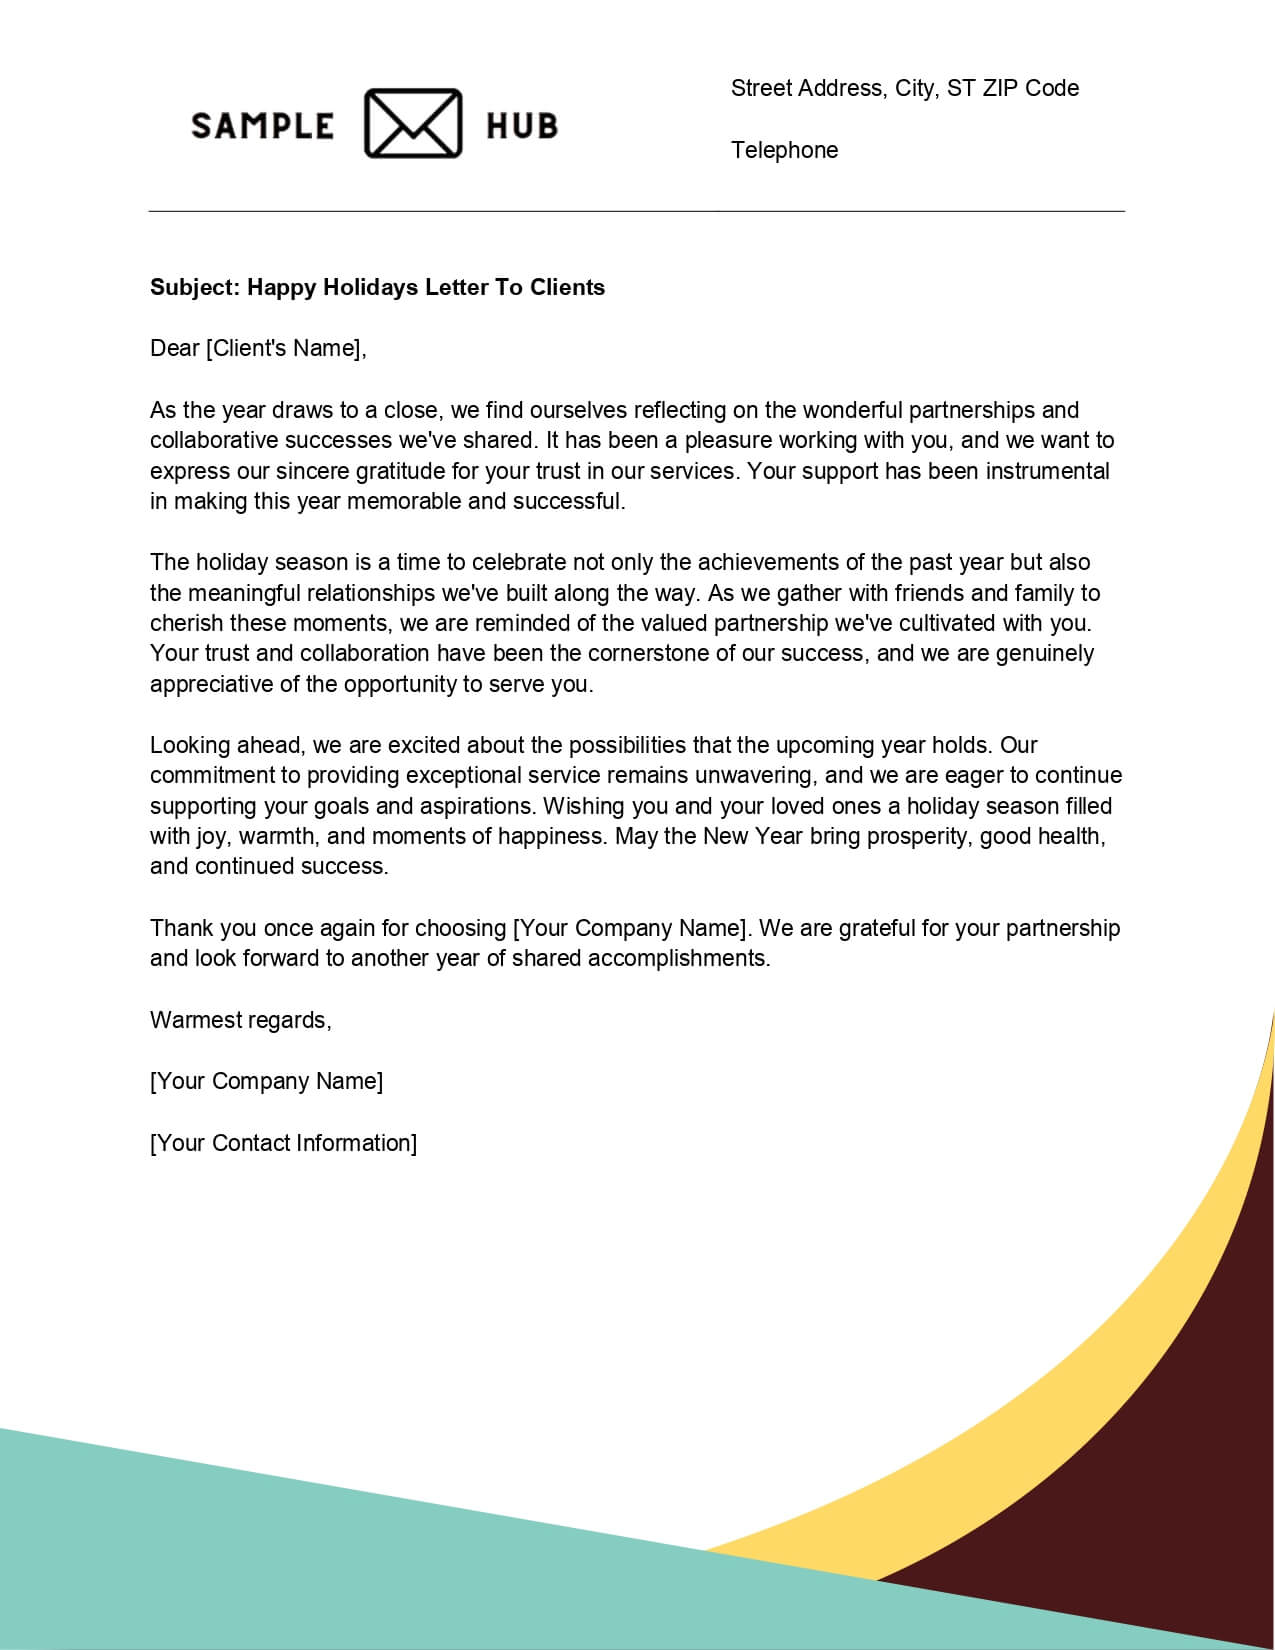 Happy Holidays Letter To Clients